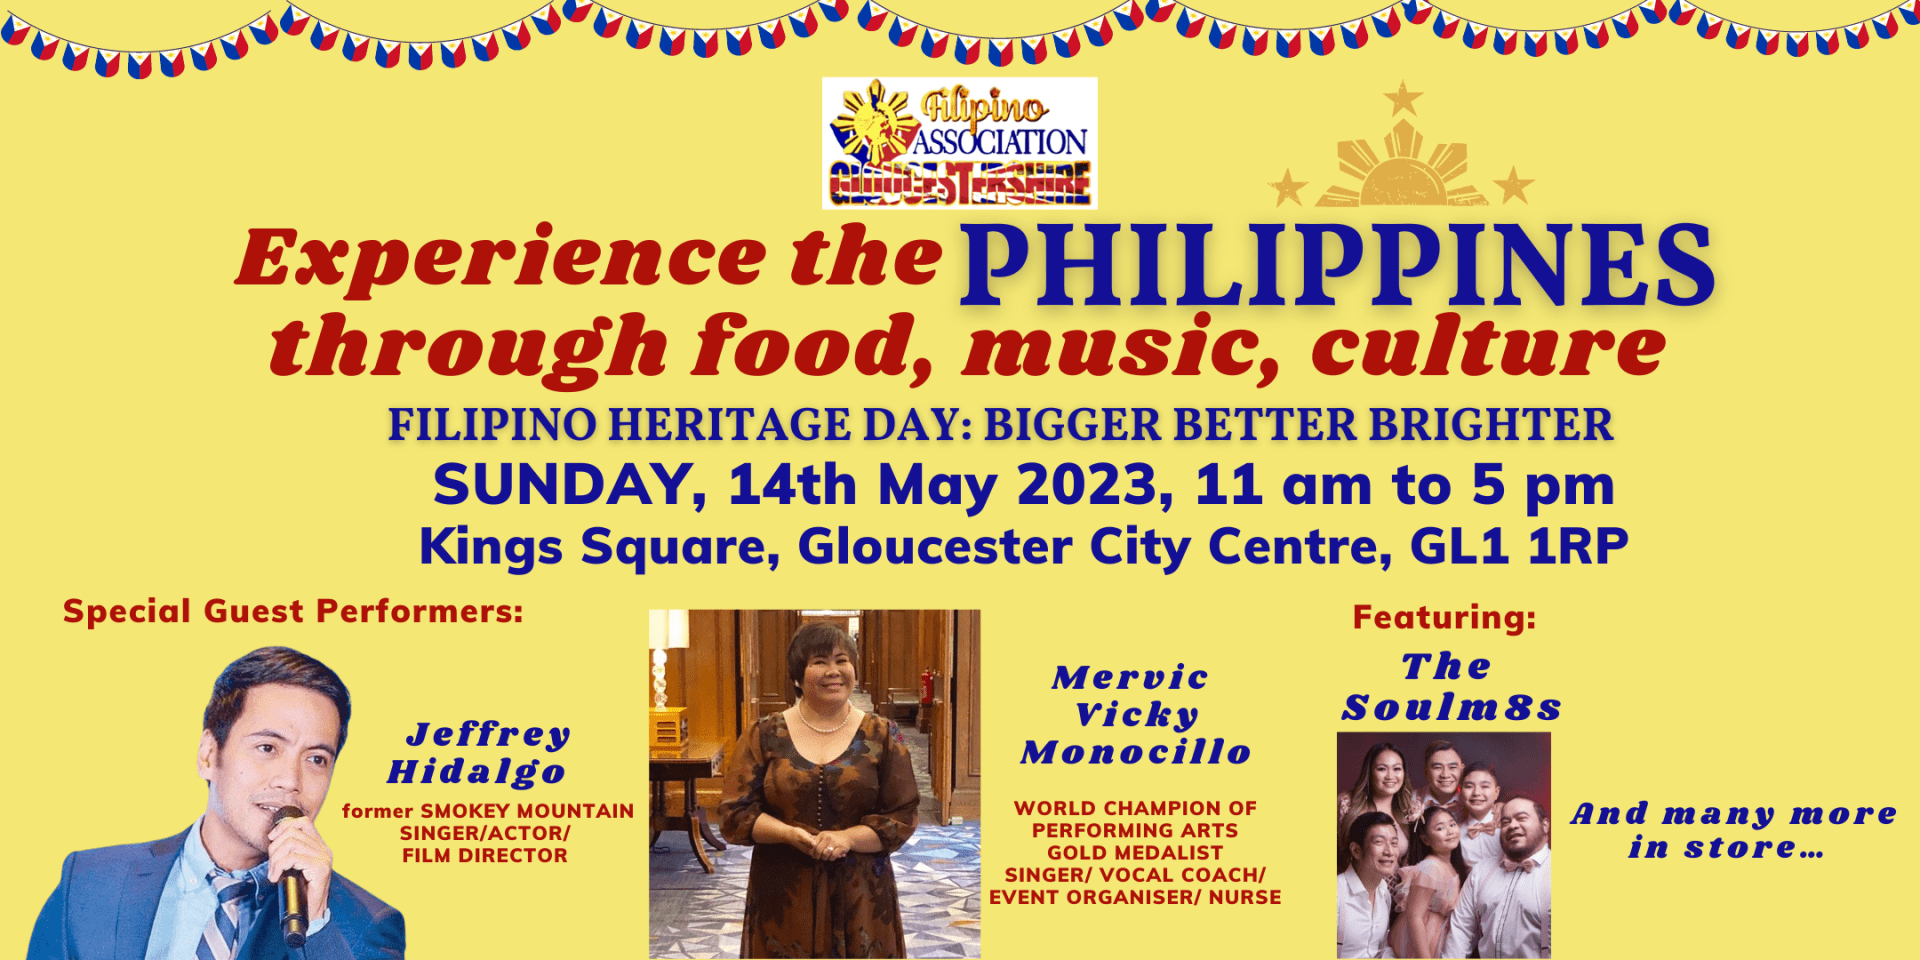 Filipino Heritage Day on Sunday 14th May at Kings Square, Gloucester, between 11am to 5pm.